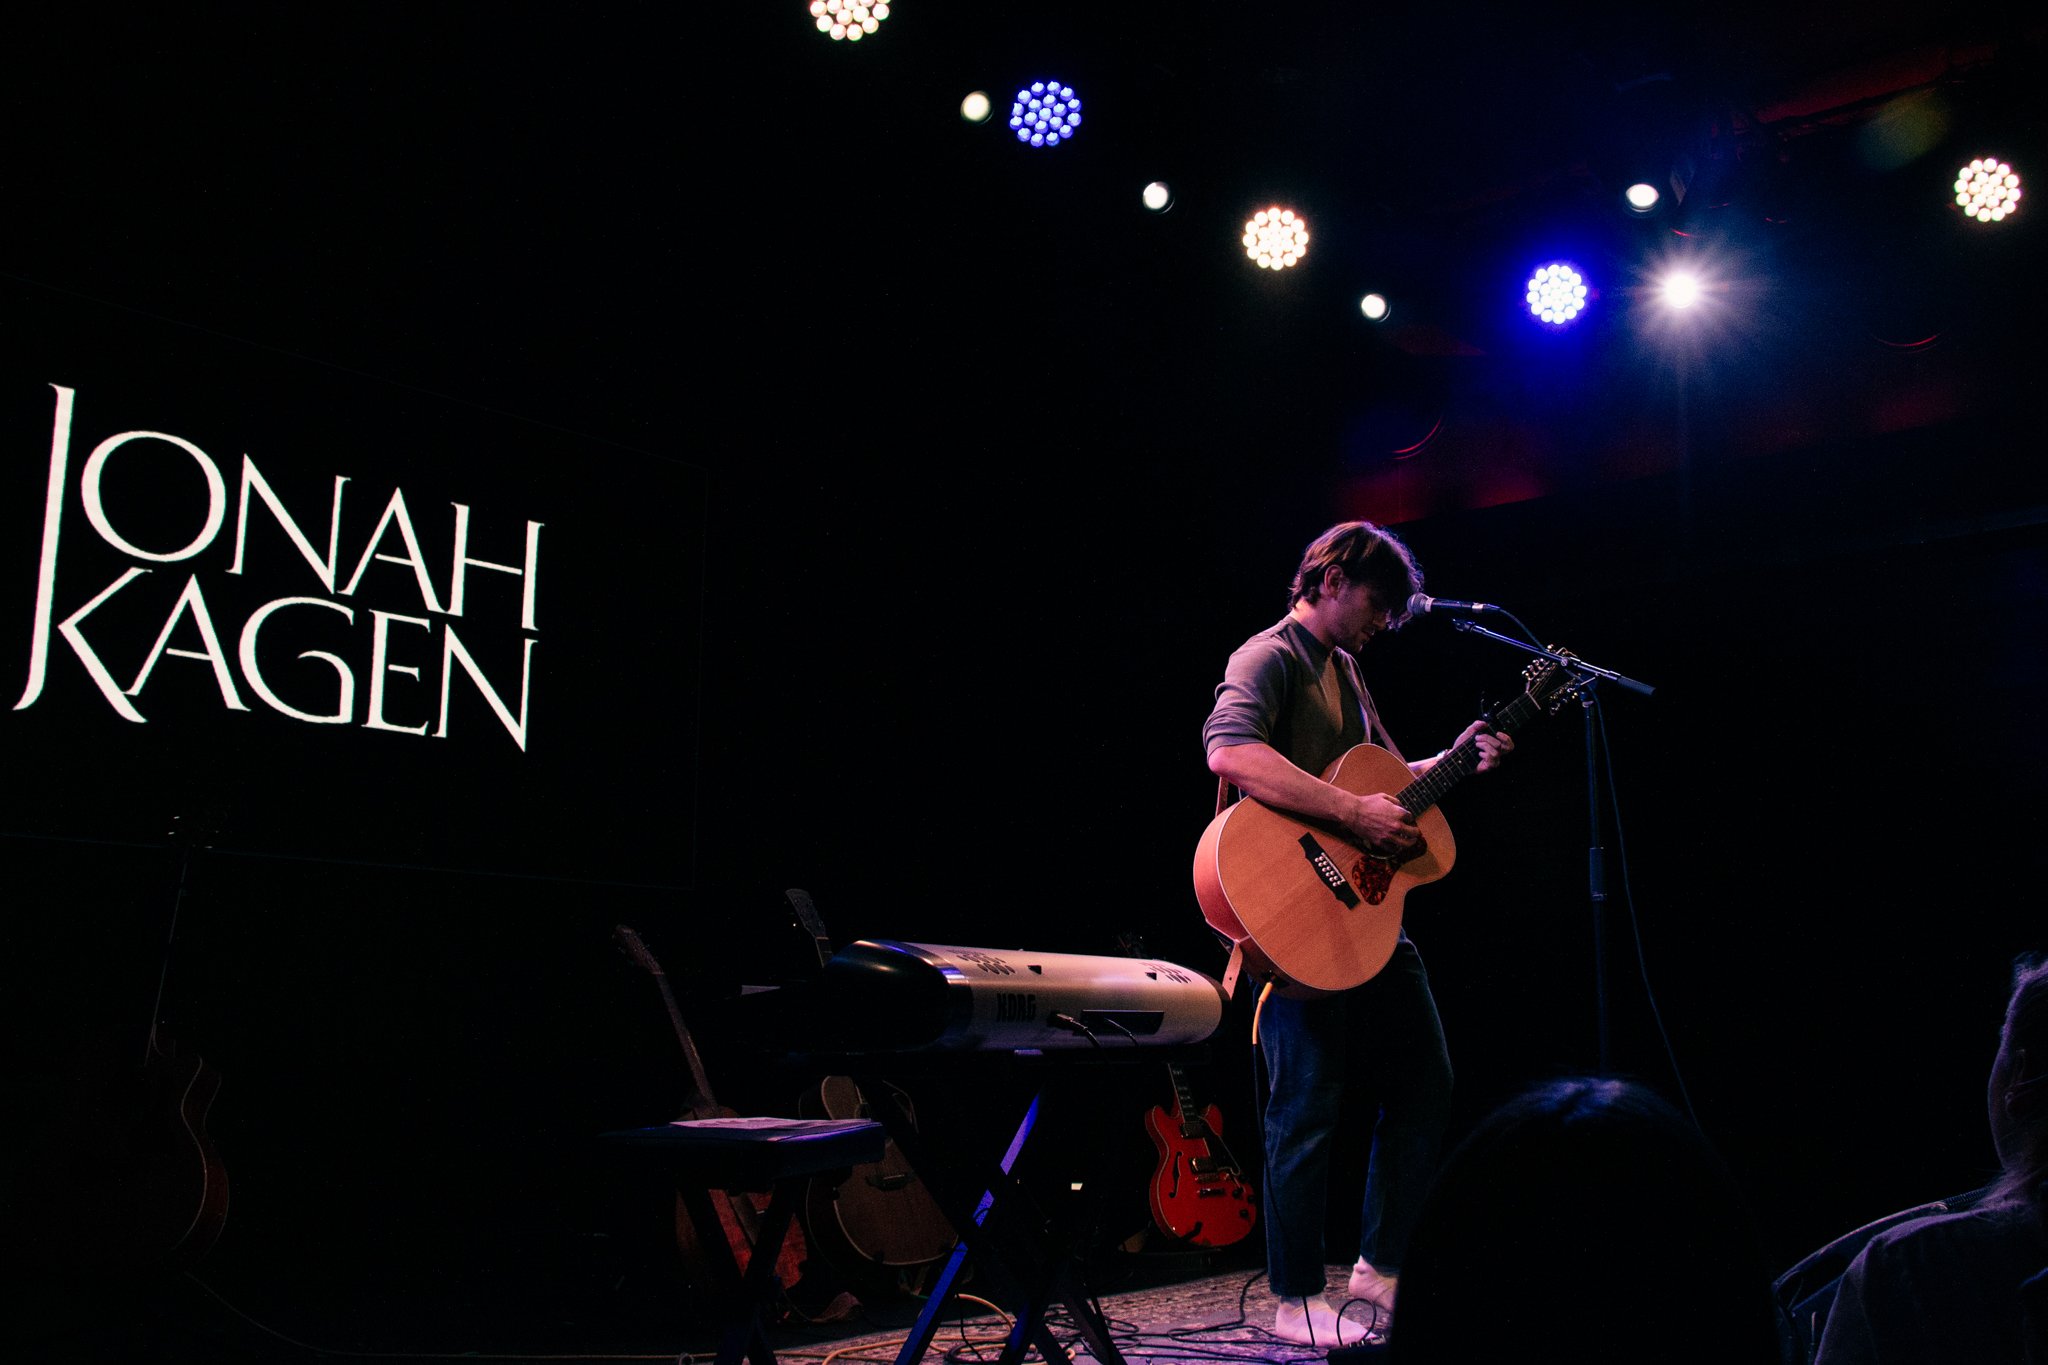  Jonah Kagen performs songs from his latest album,  The Roads , at ACL Live at 3TEN. 